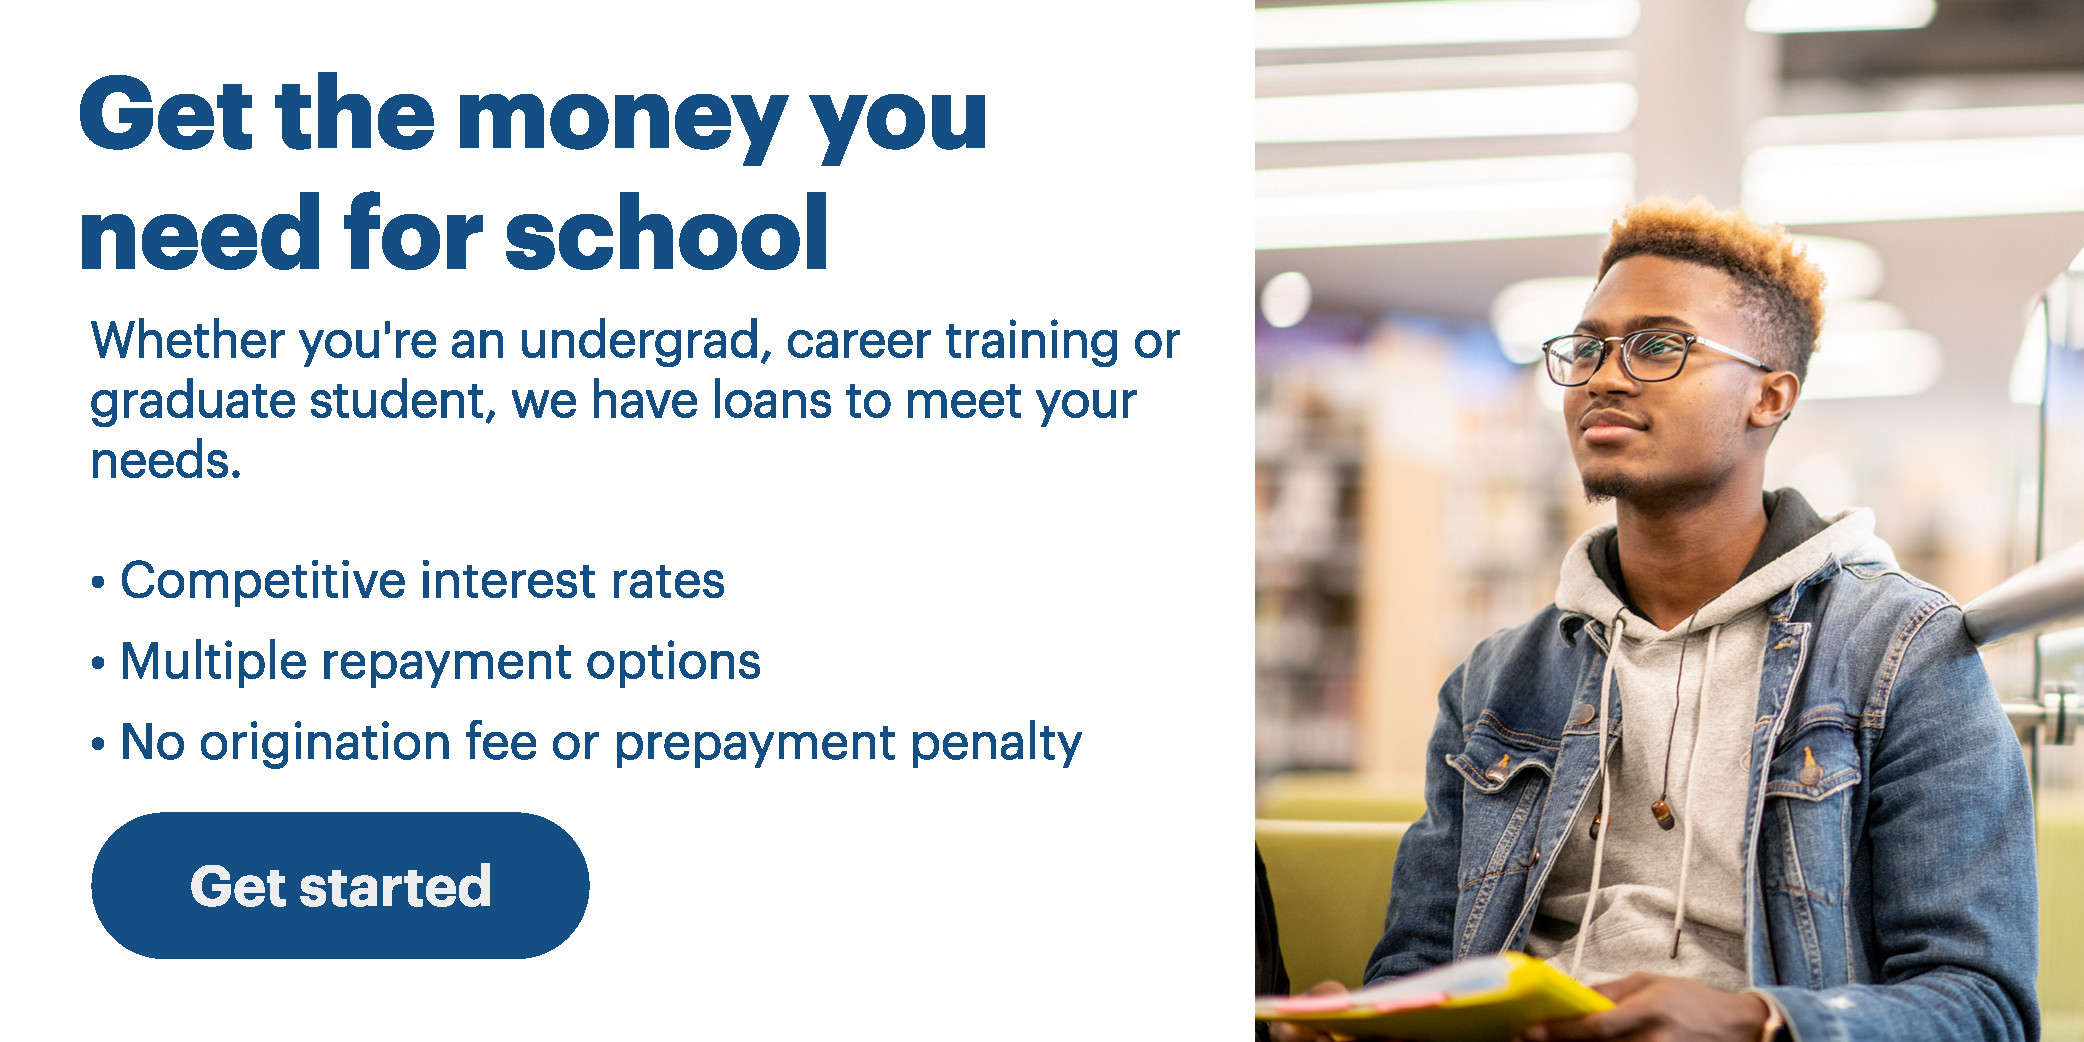 Wherever you are in your higher education, get the money you need for school. Student loans from FreedomBank in partnership with Sallie Mae® could help! Click here to get started.